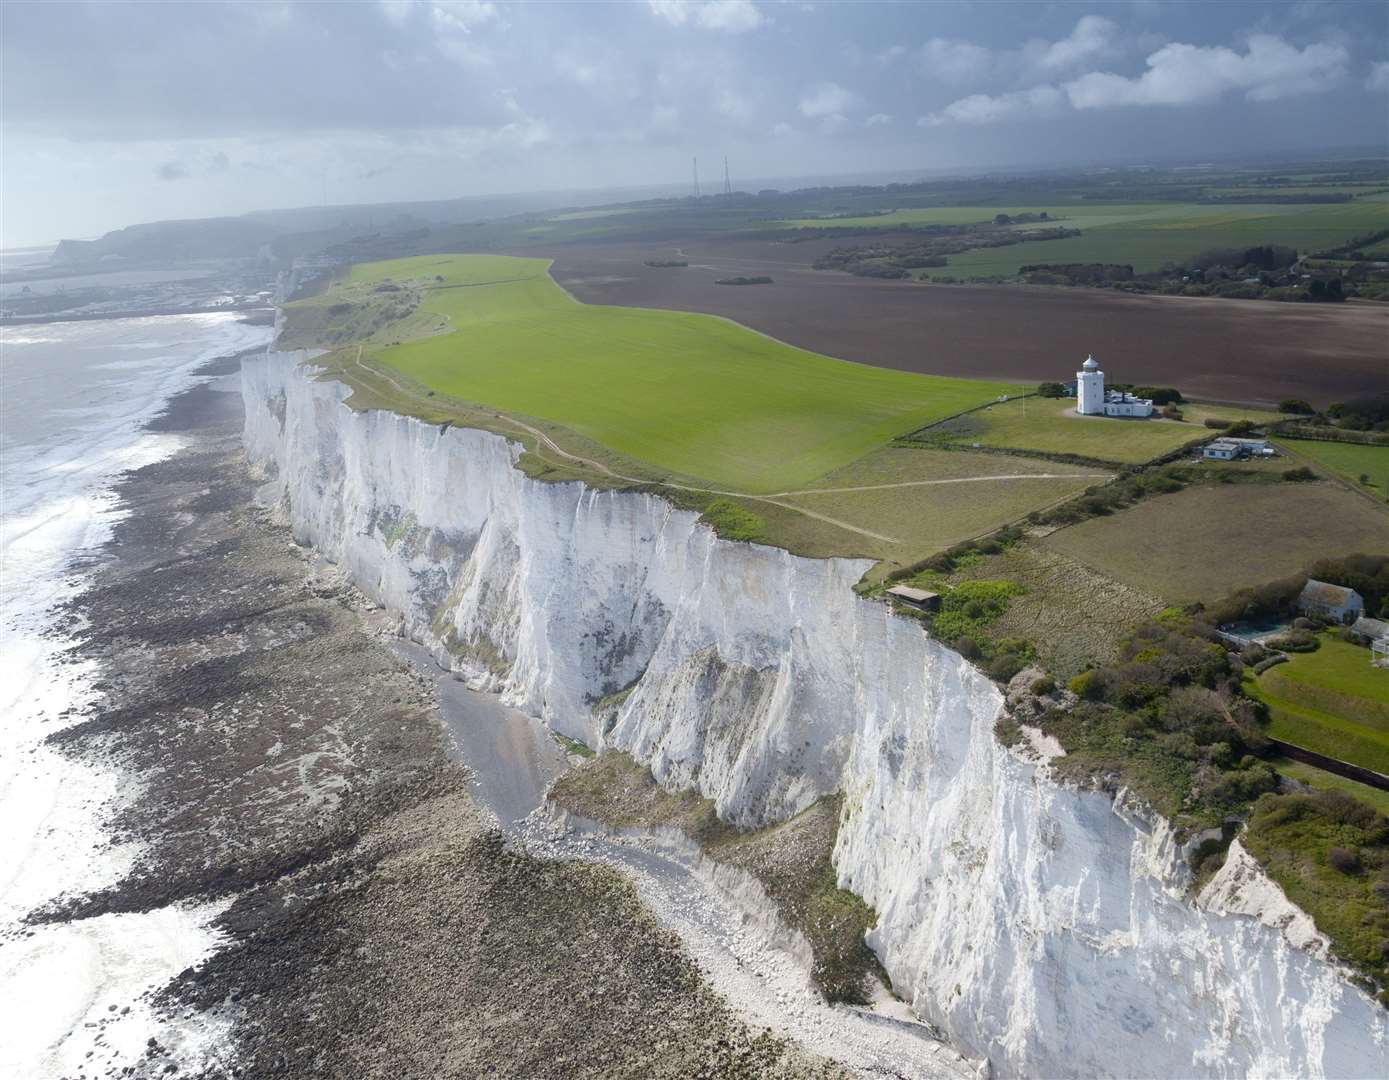 A perfect spot for Kentish romance - the White Cliffs of Dover